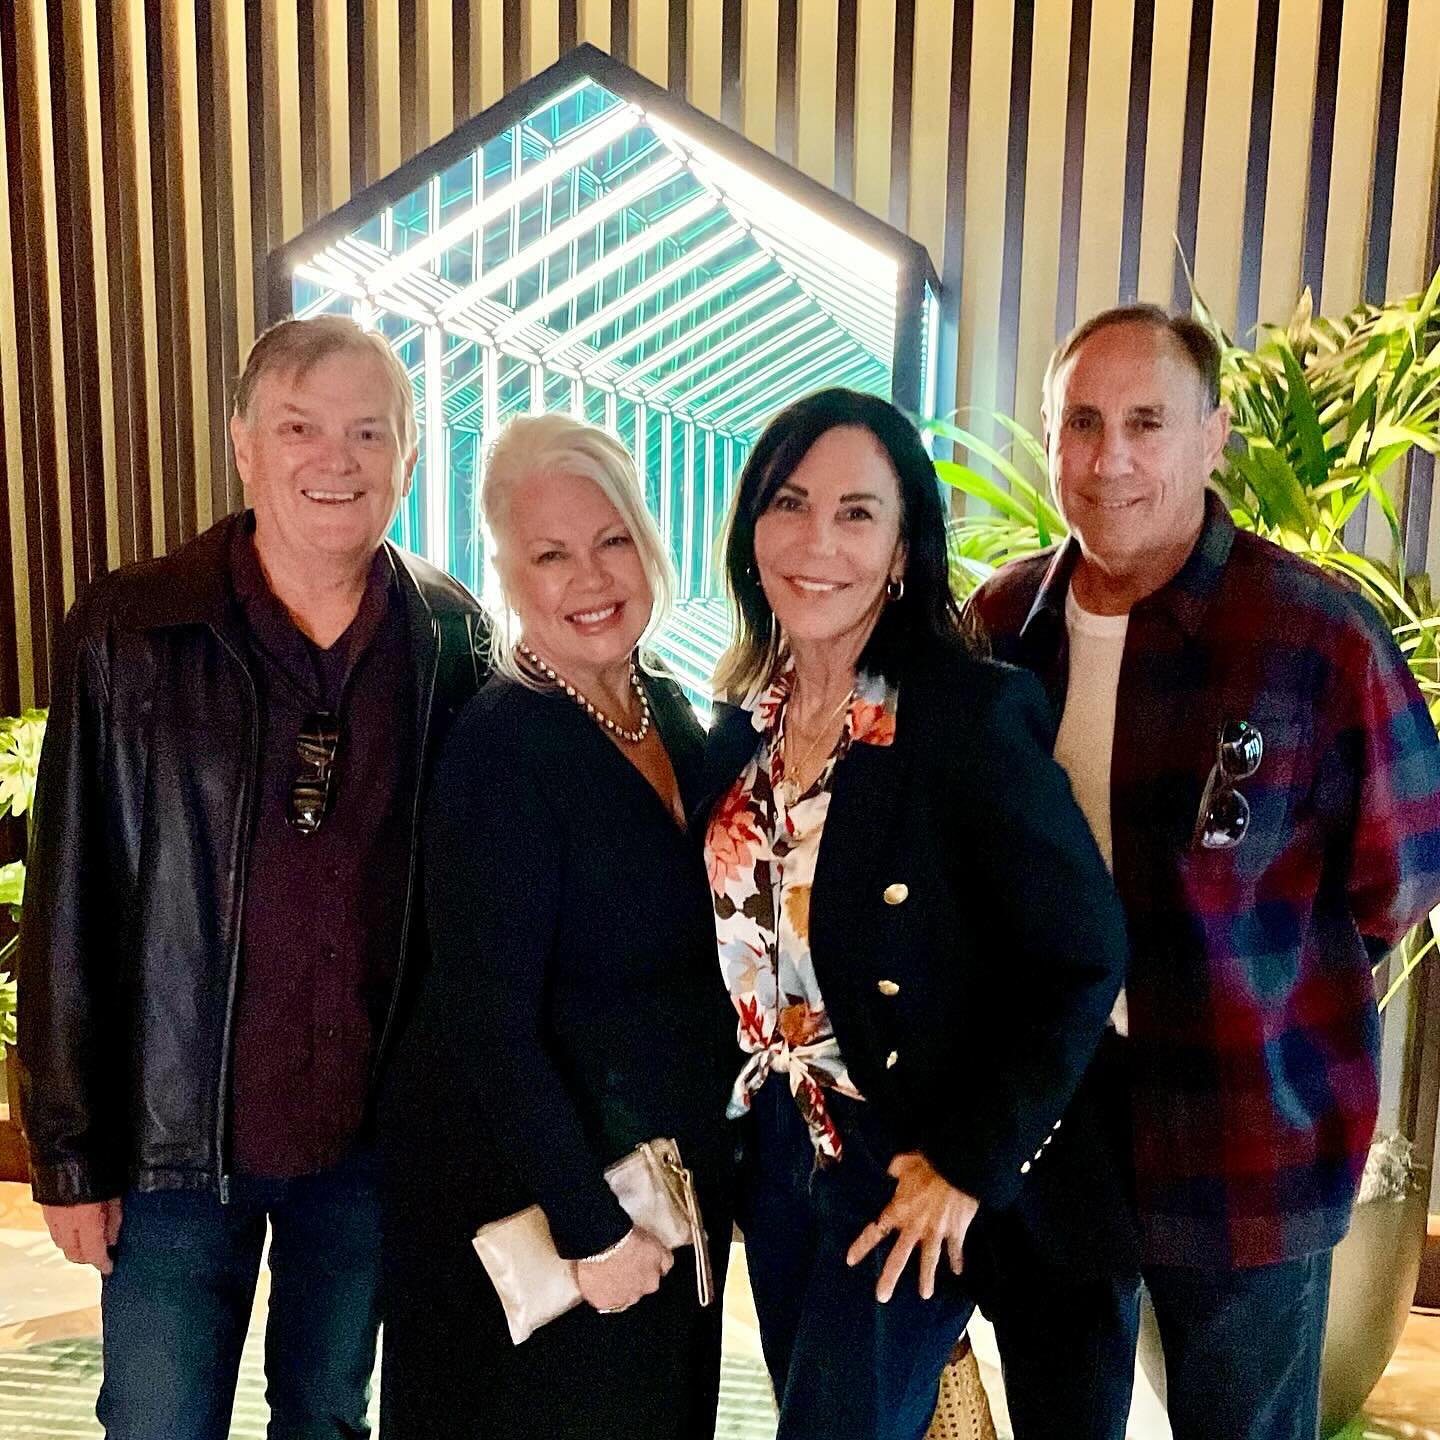 #crew 🙌🏼 😍 Such a treat to have a golden hour 🌆 sendoff to my ✨gala night ✨events with these fab three!! 🤩@scottclindstrom @dorieswanson #pendrynewportbeach #curatedtravel🌏 #newportbeachca